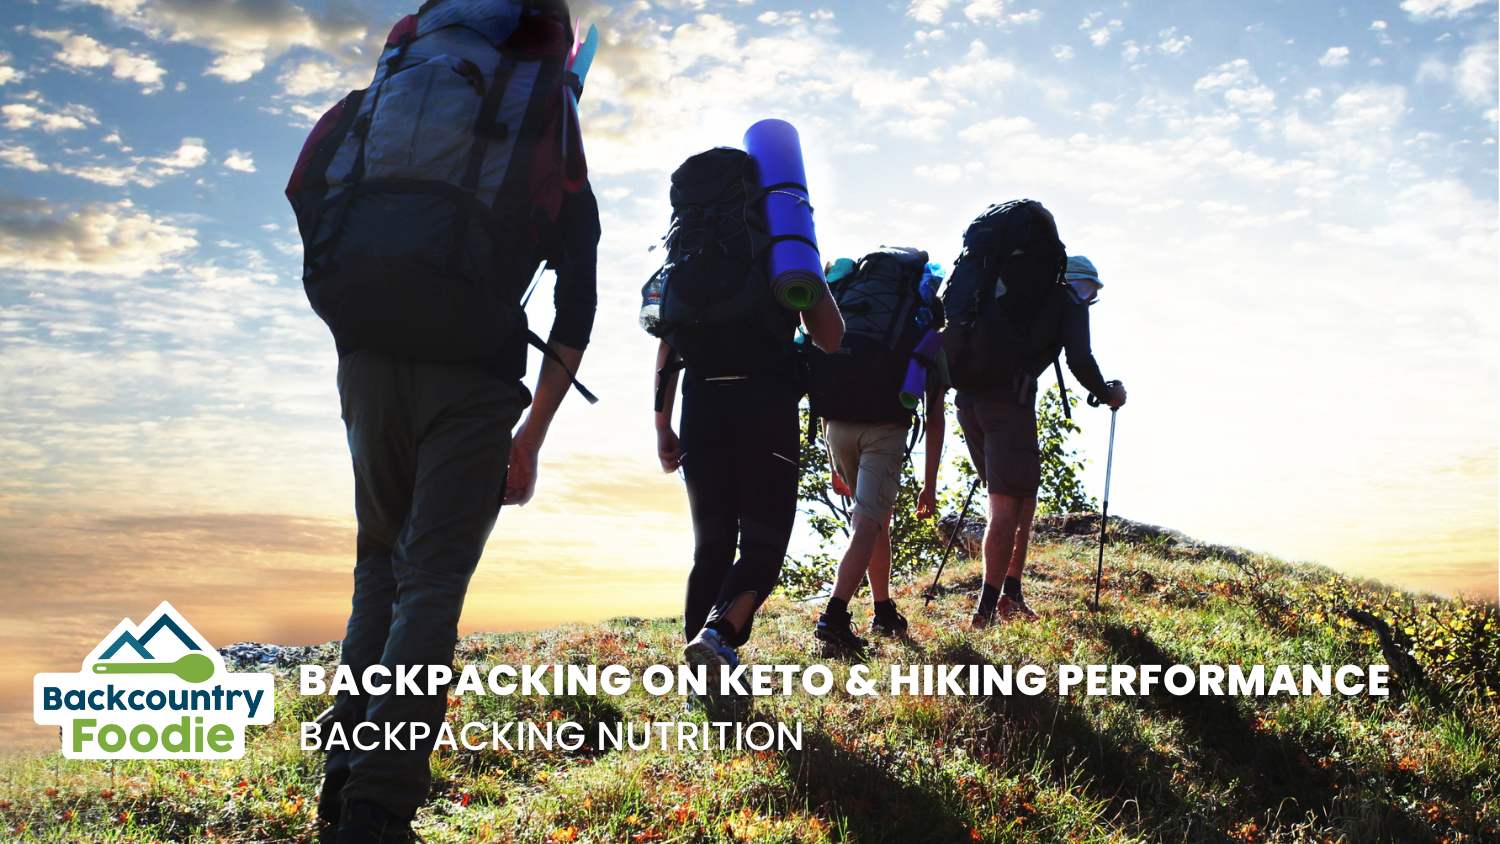 Backcountry Foodie blog backpacking on keto and hiking performance thumbnail